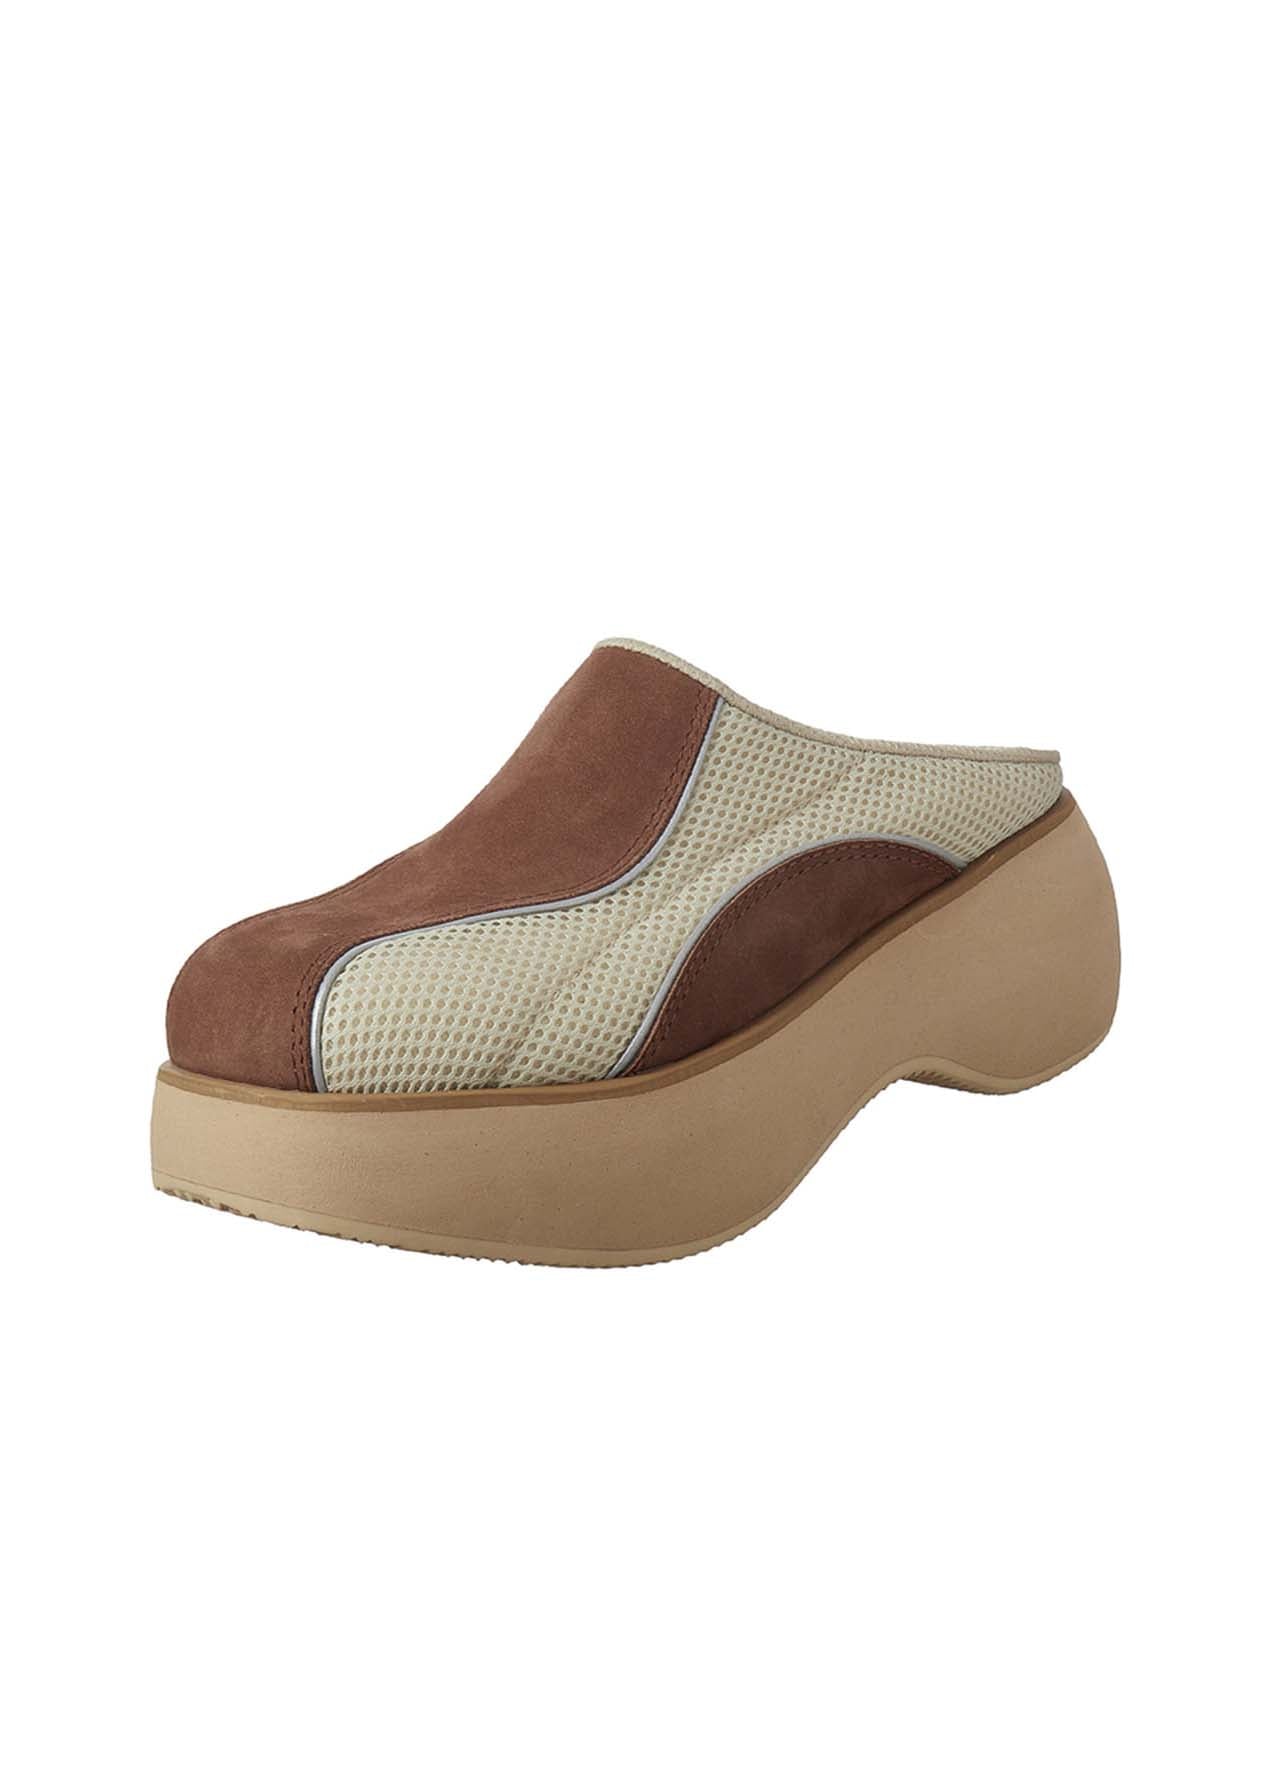 Beige & Brown Paneled Slippers - 157Moments